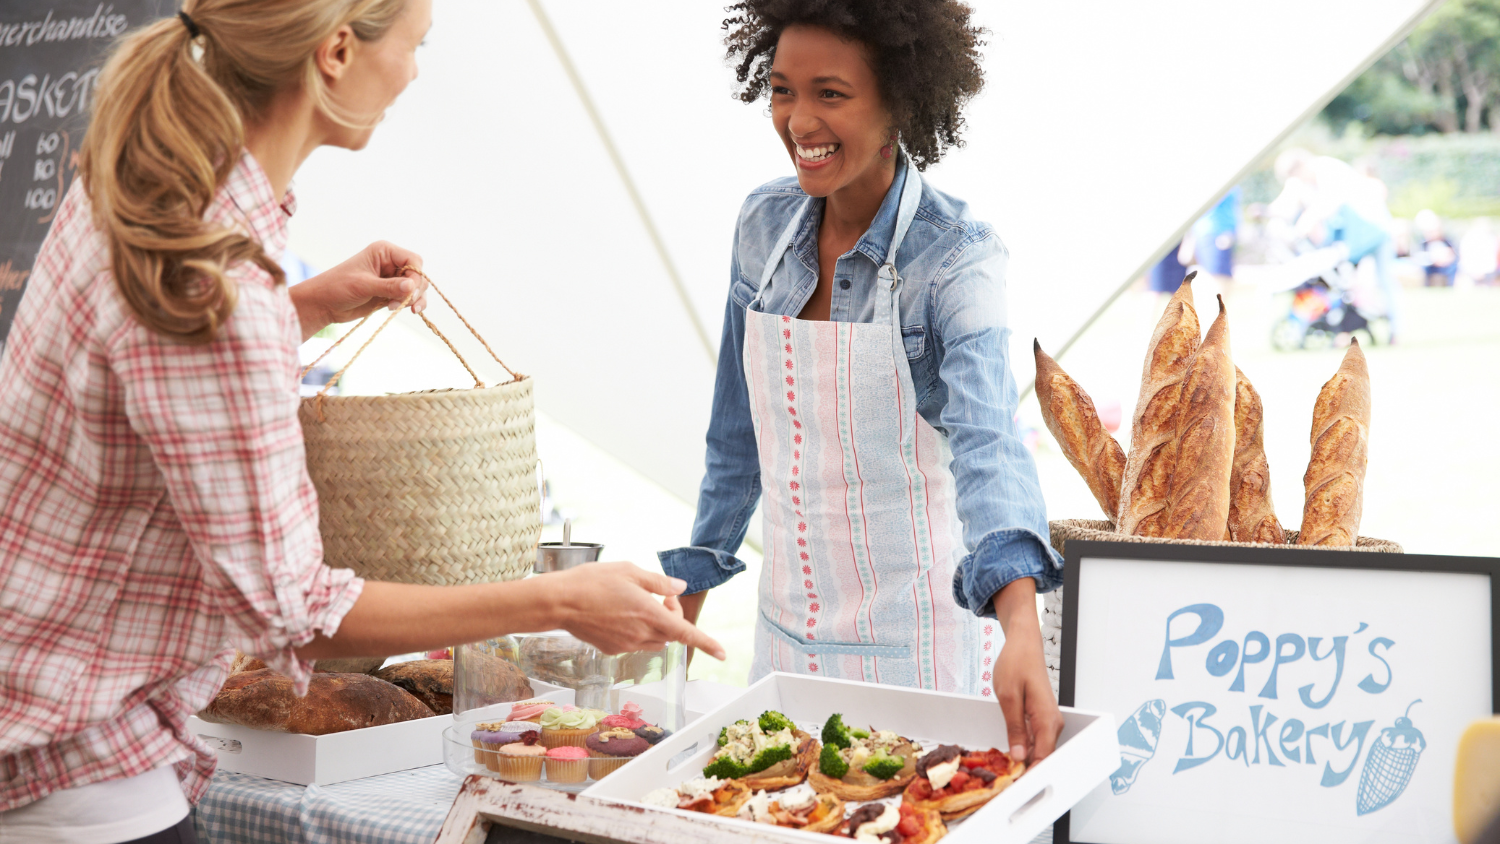 How To Become A Vendor At Farmers Markets